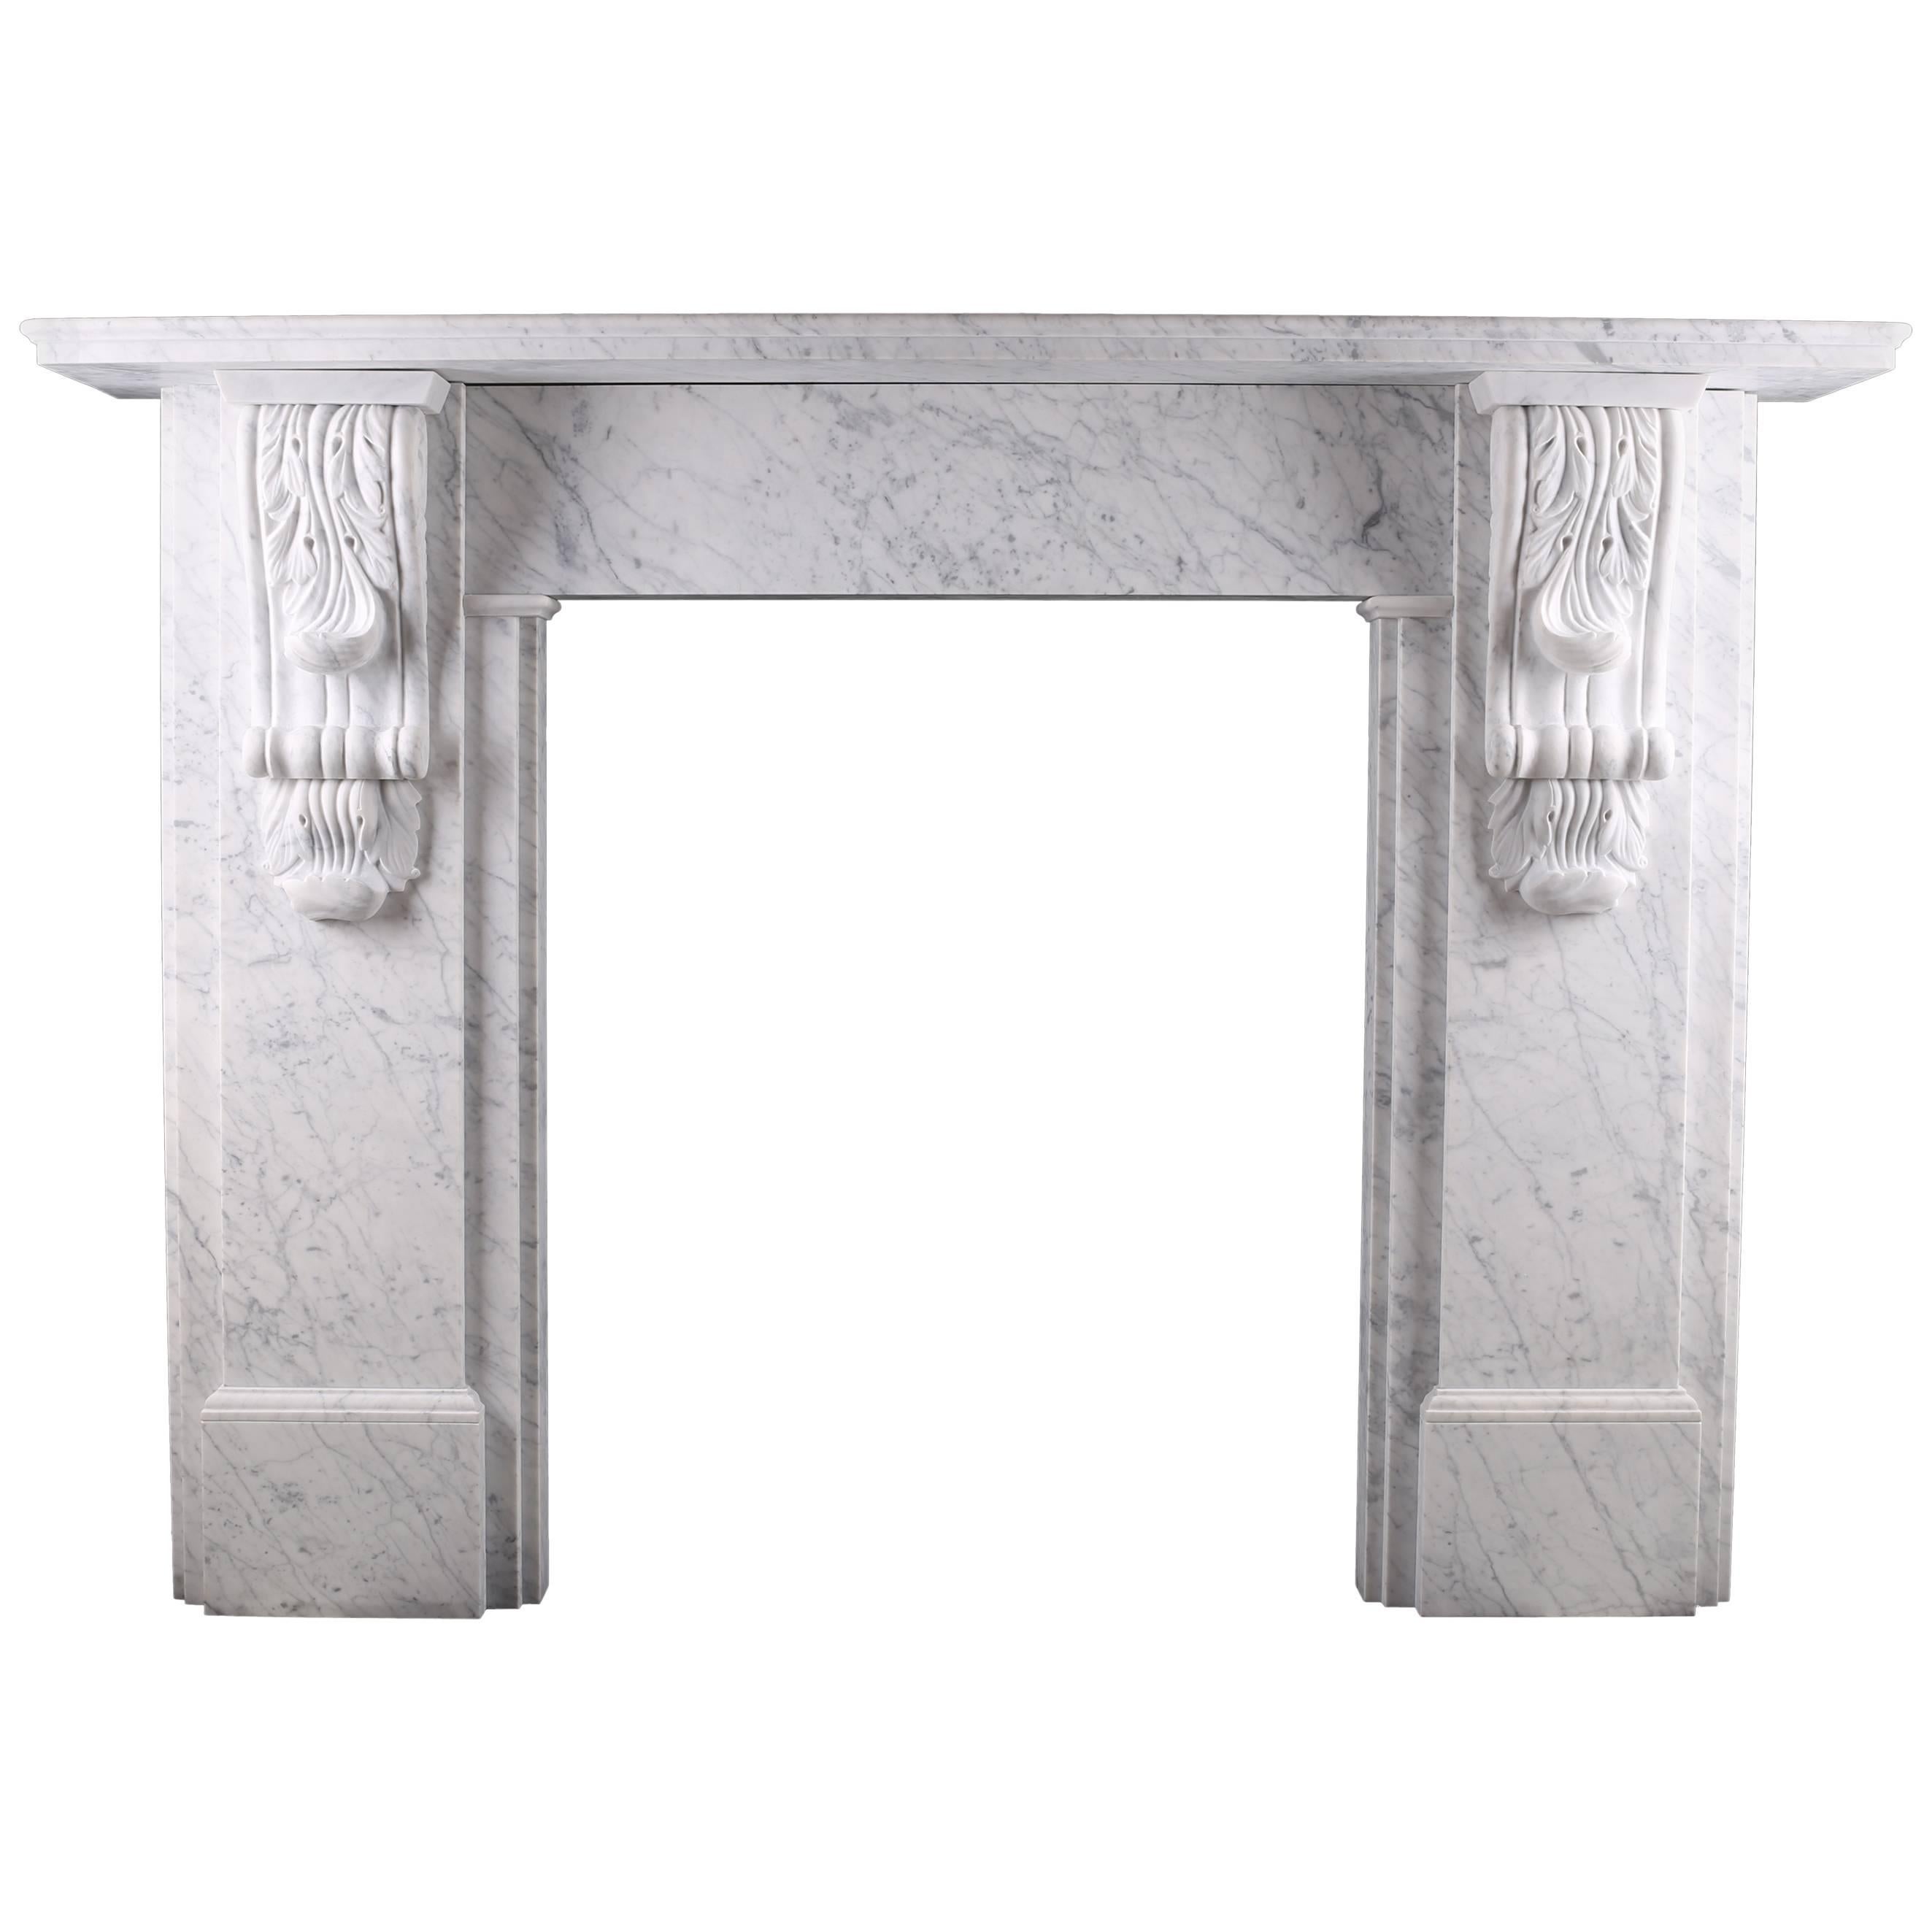 Grand Victorian Carved Corbel Fireplace in Italian Carrara Marble For Sale